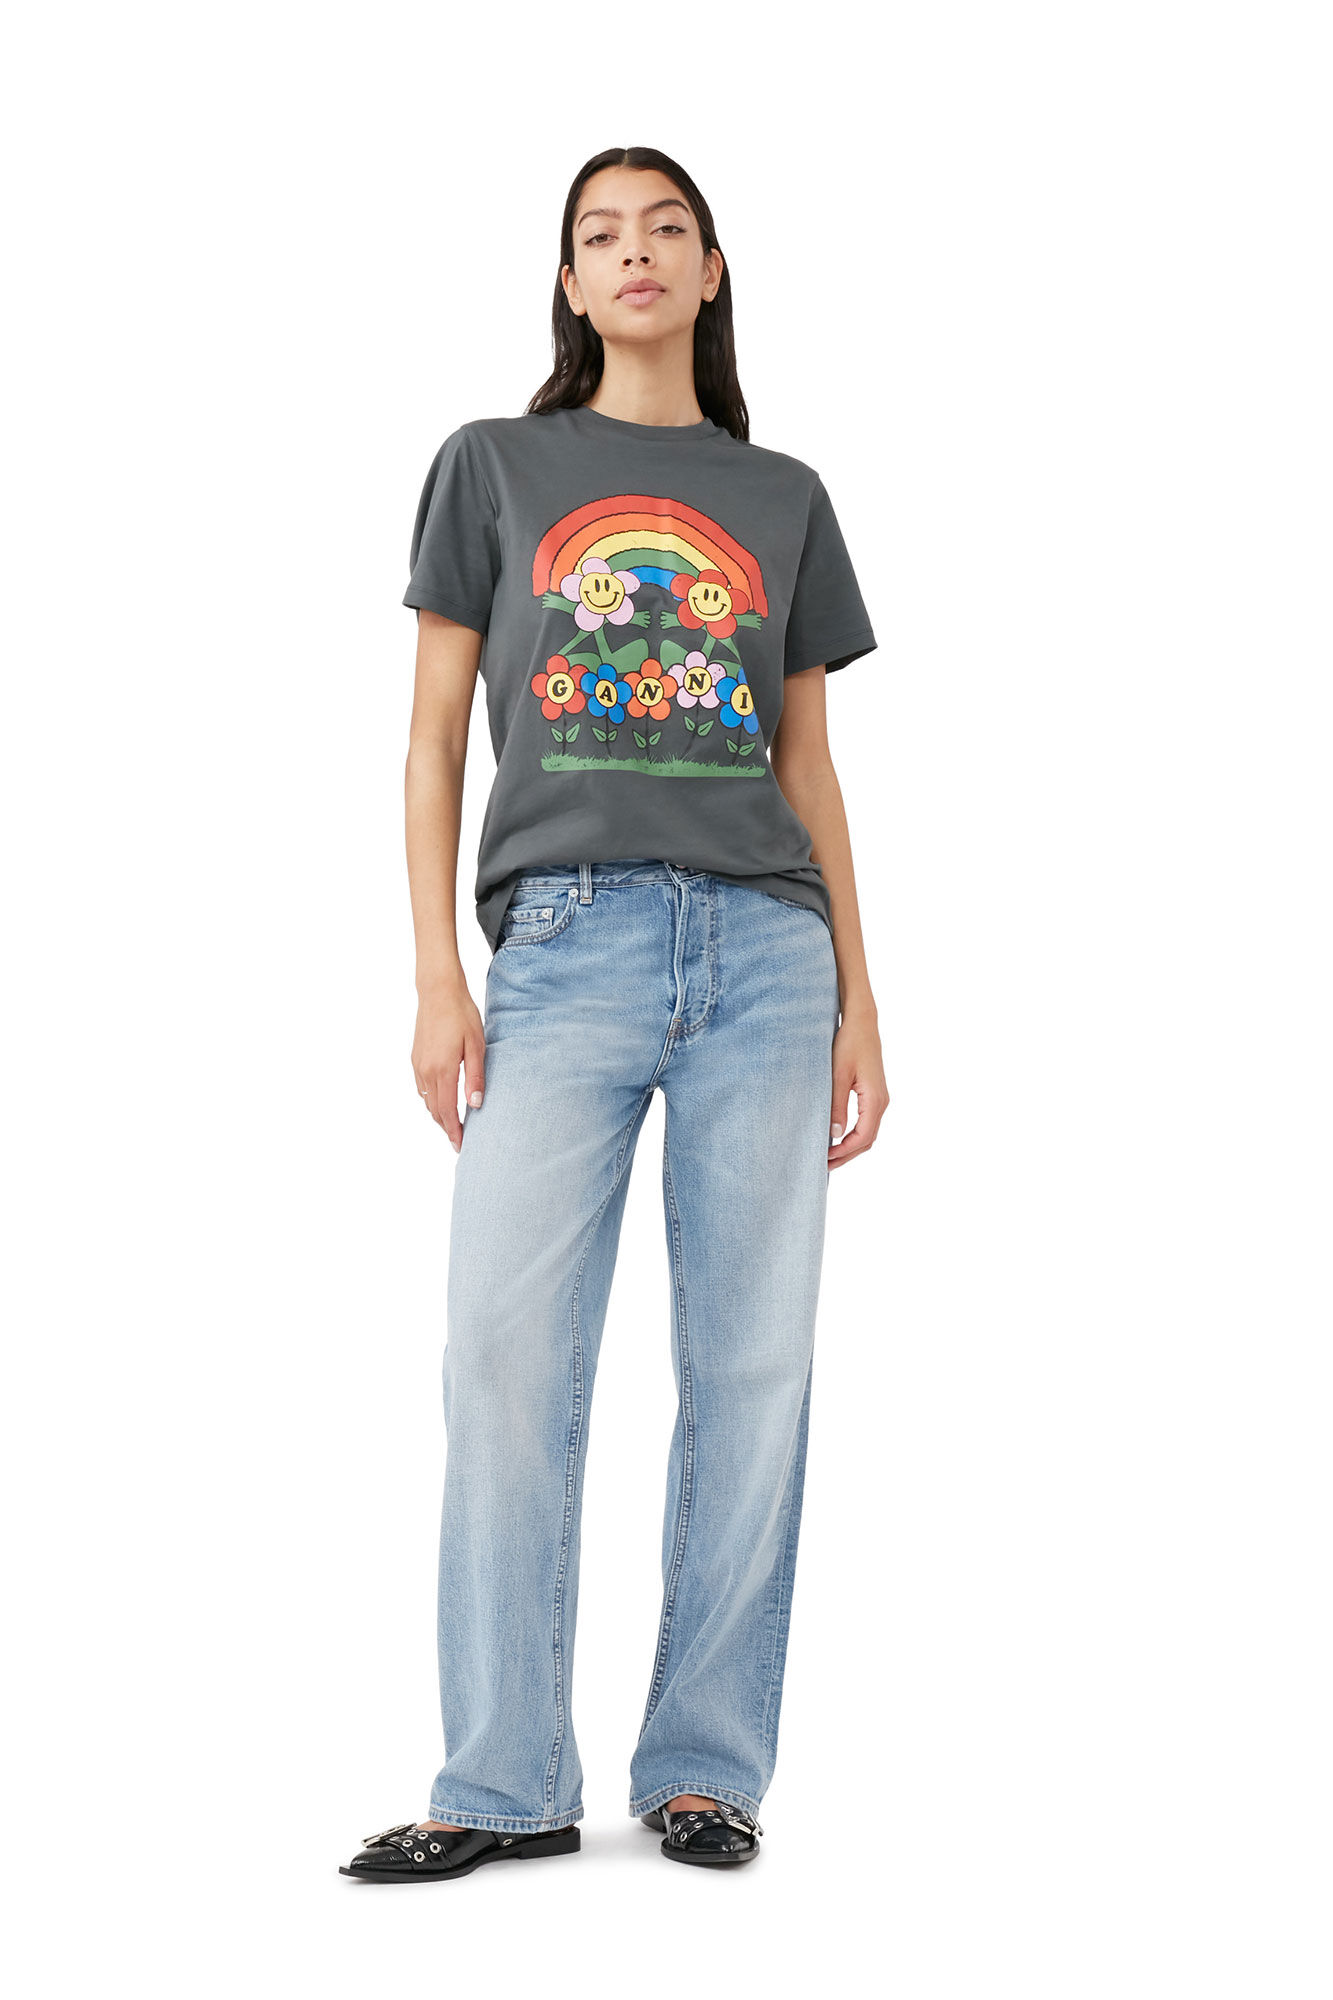 GANNI Jersey Rainbow Relaxed T-Shirt in Ash XS